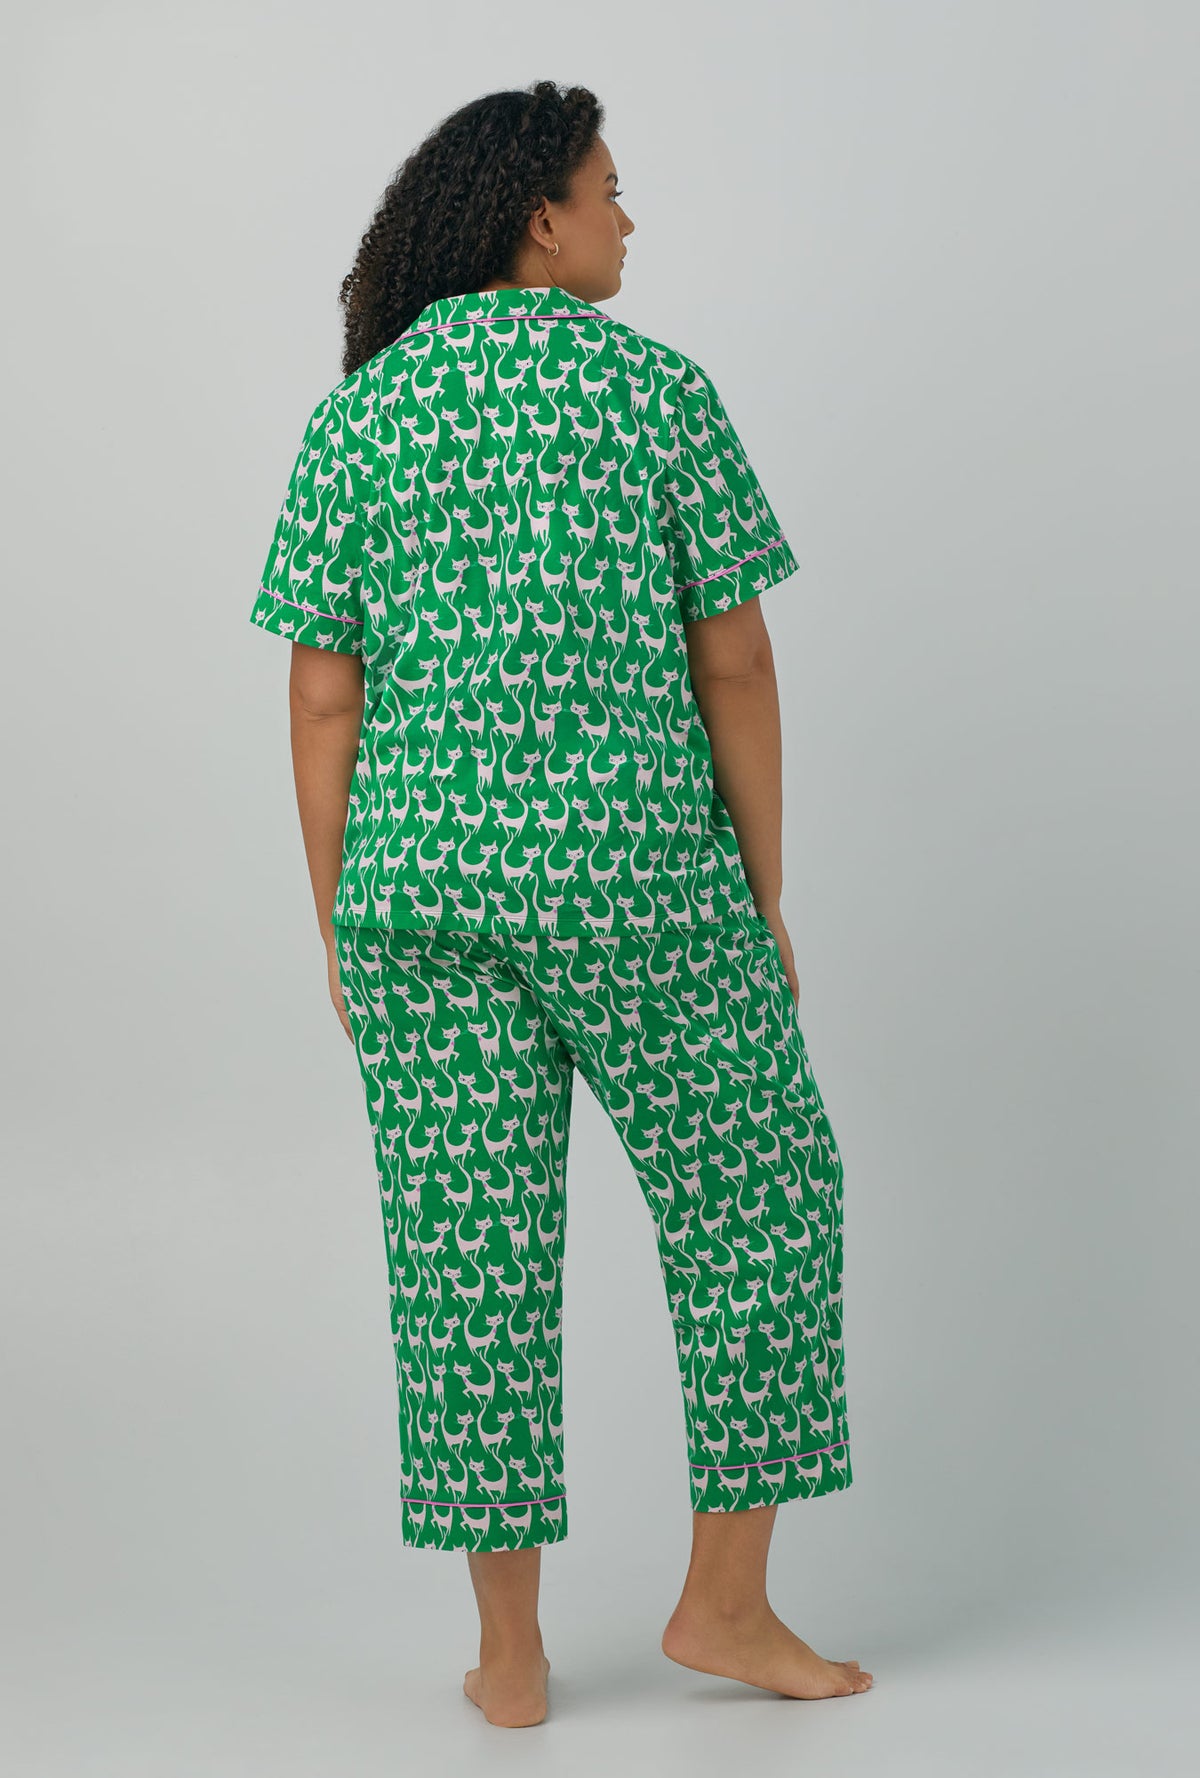 A lady wearing green plus size Short Sleeve Classic Stretch Jersey Cropped with Cool Cats print